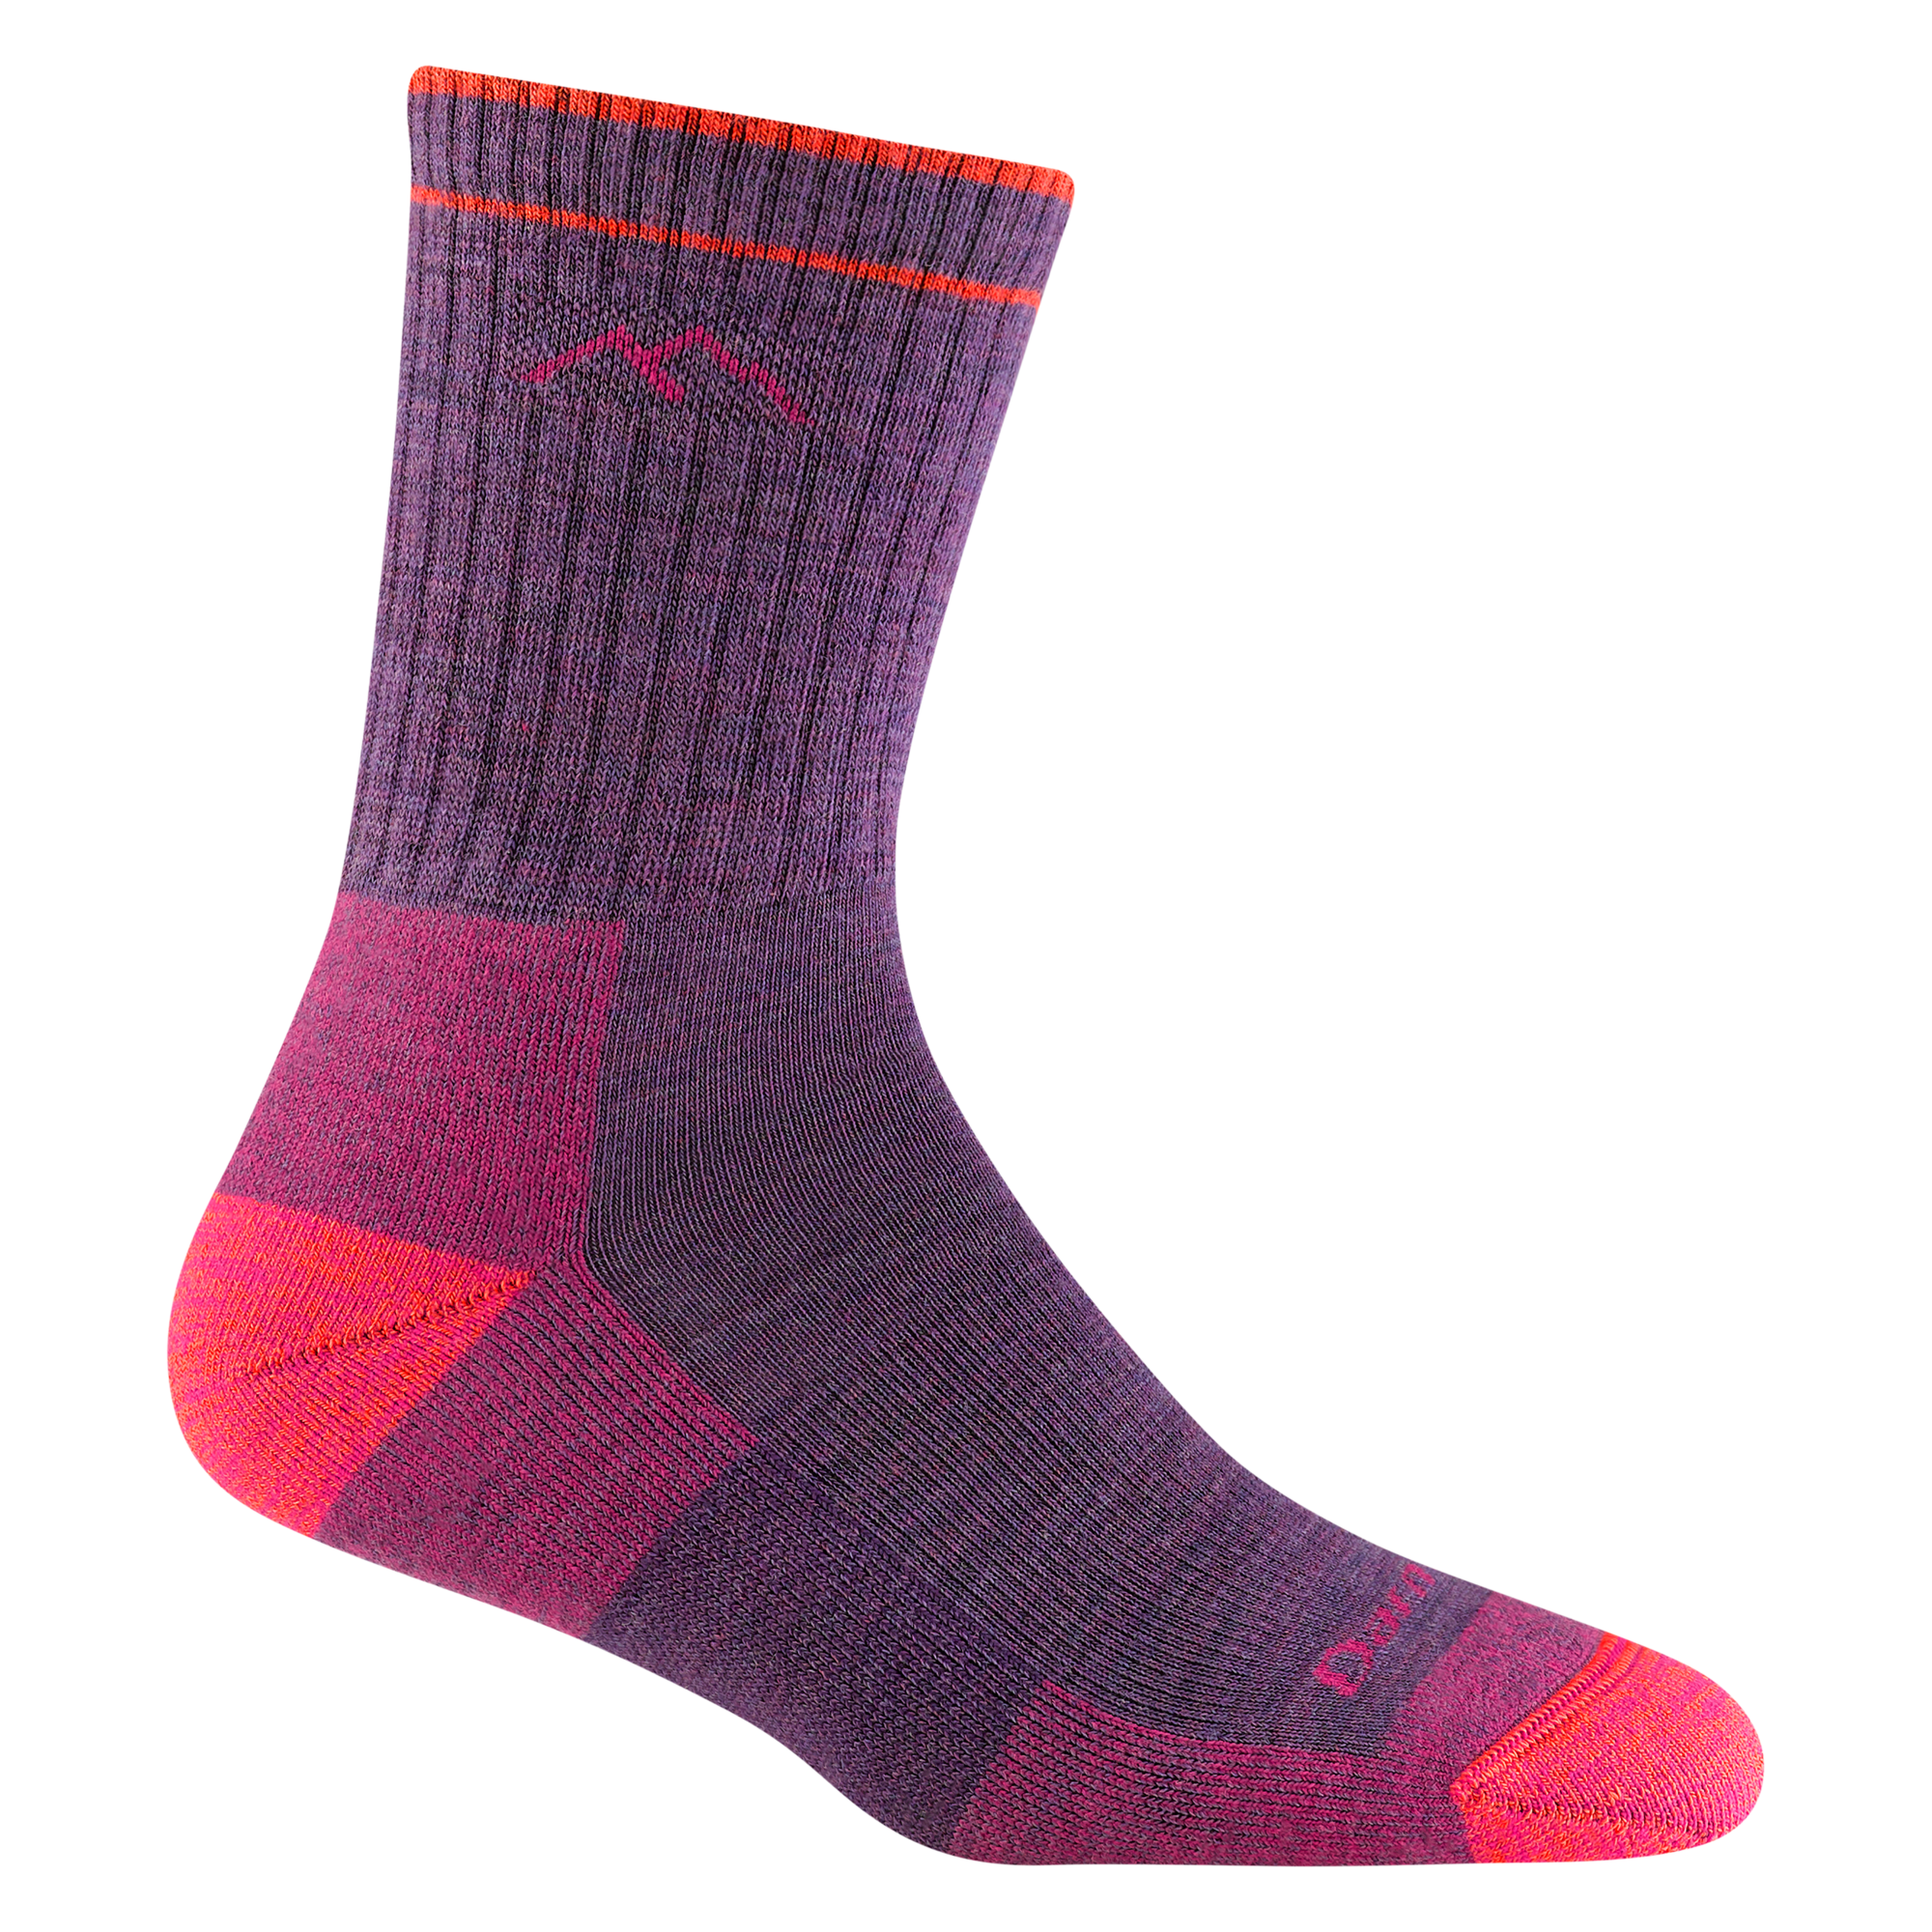 1903 women's hiker micro crew hiking sock in plum heather with pink toe/heel accents and darn tough mountain detail